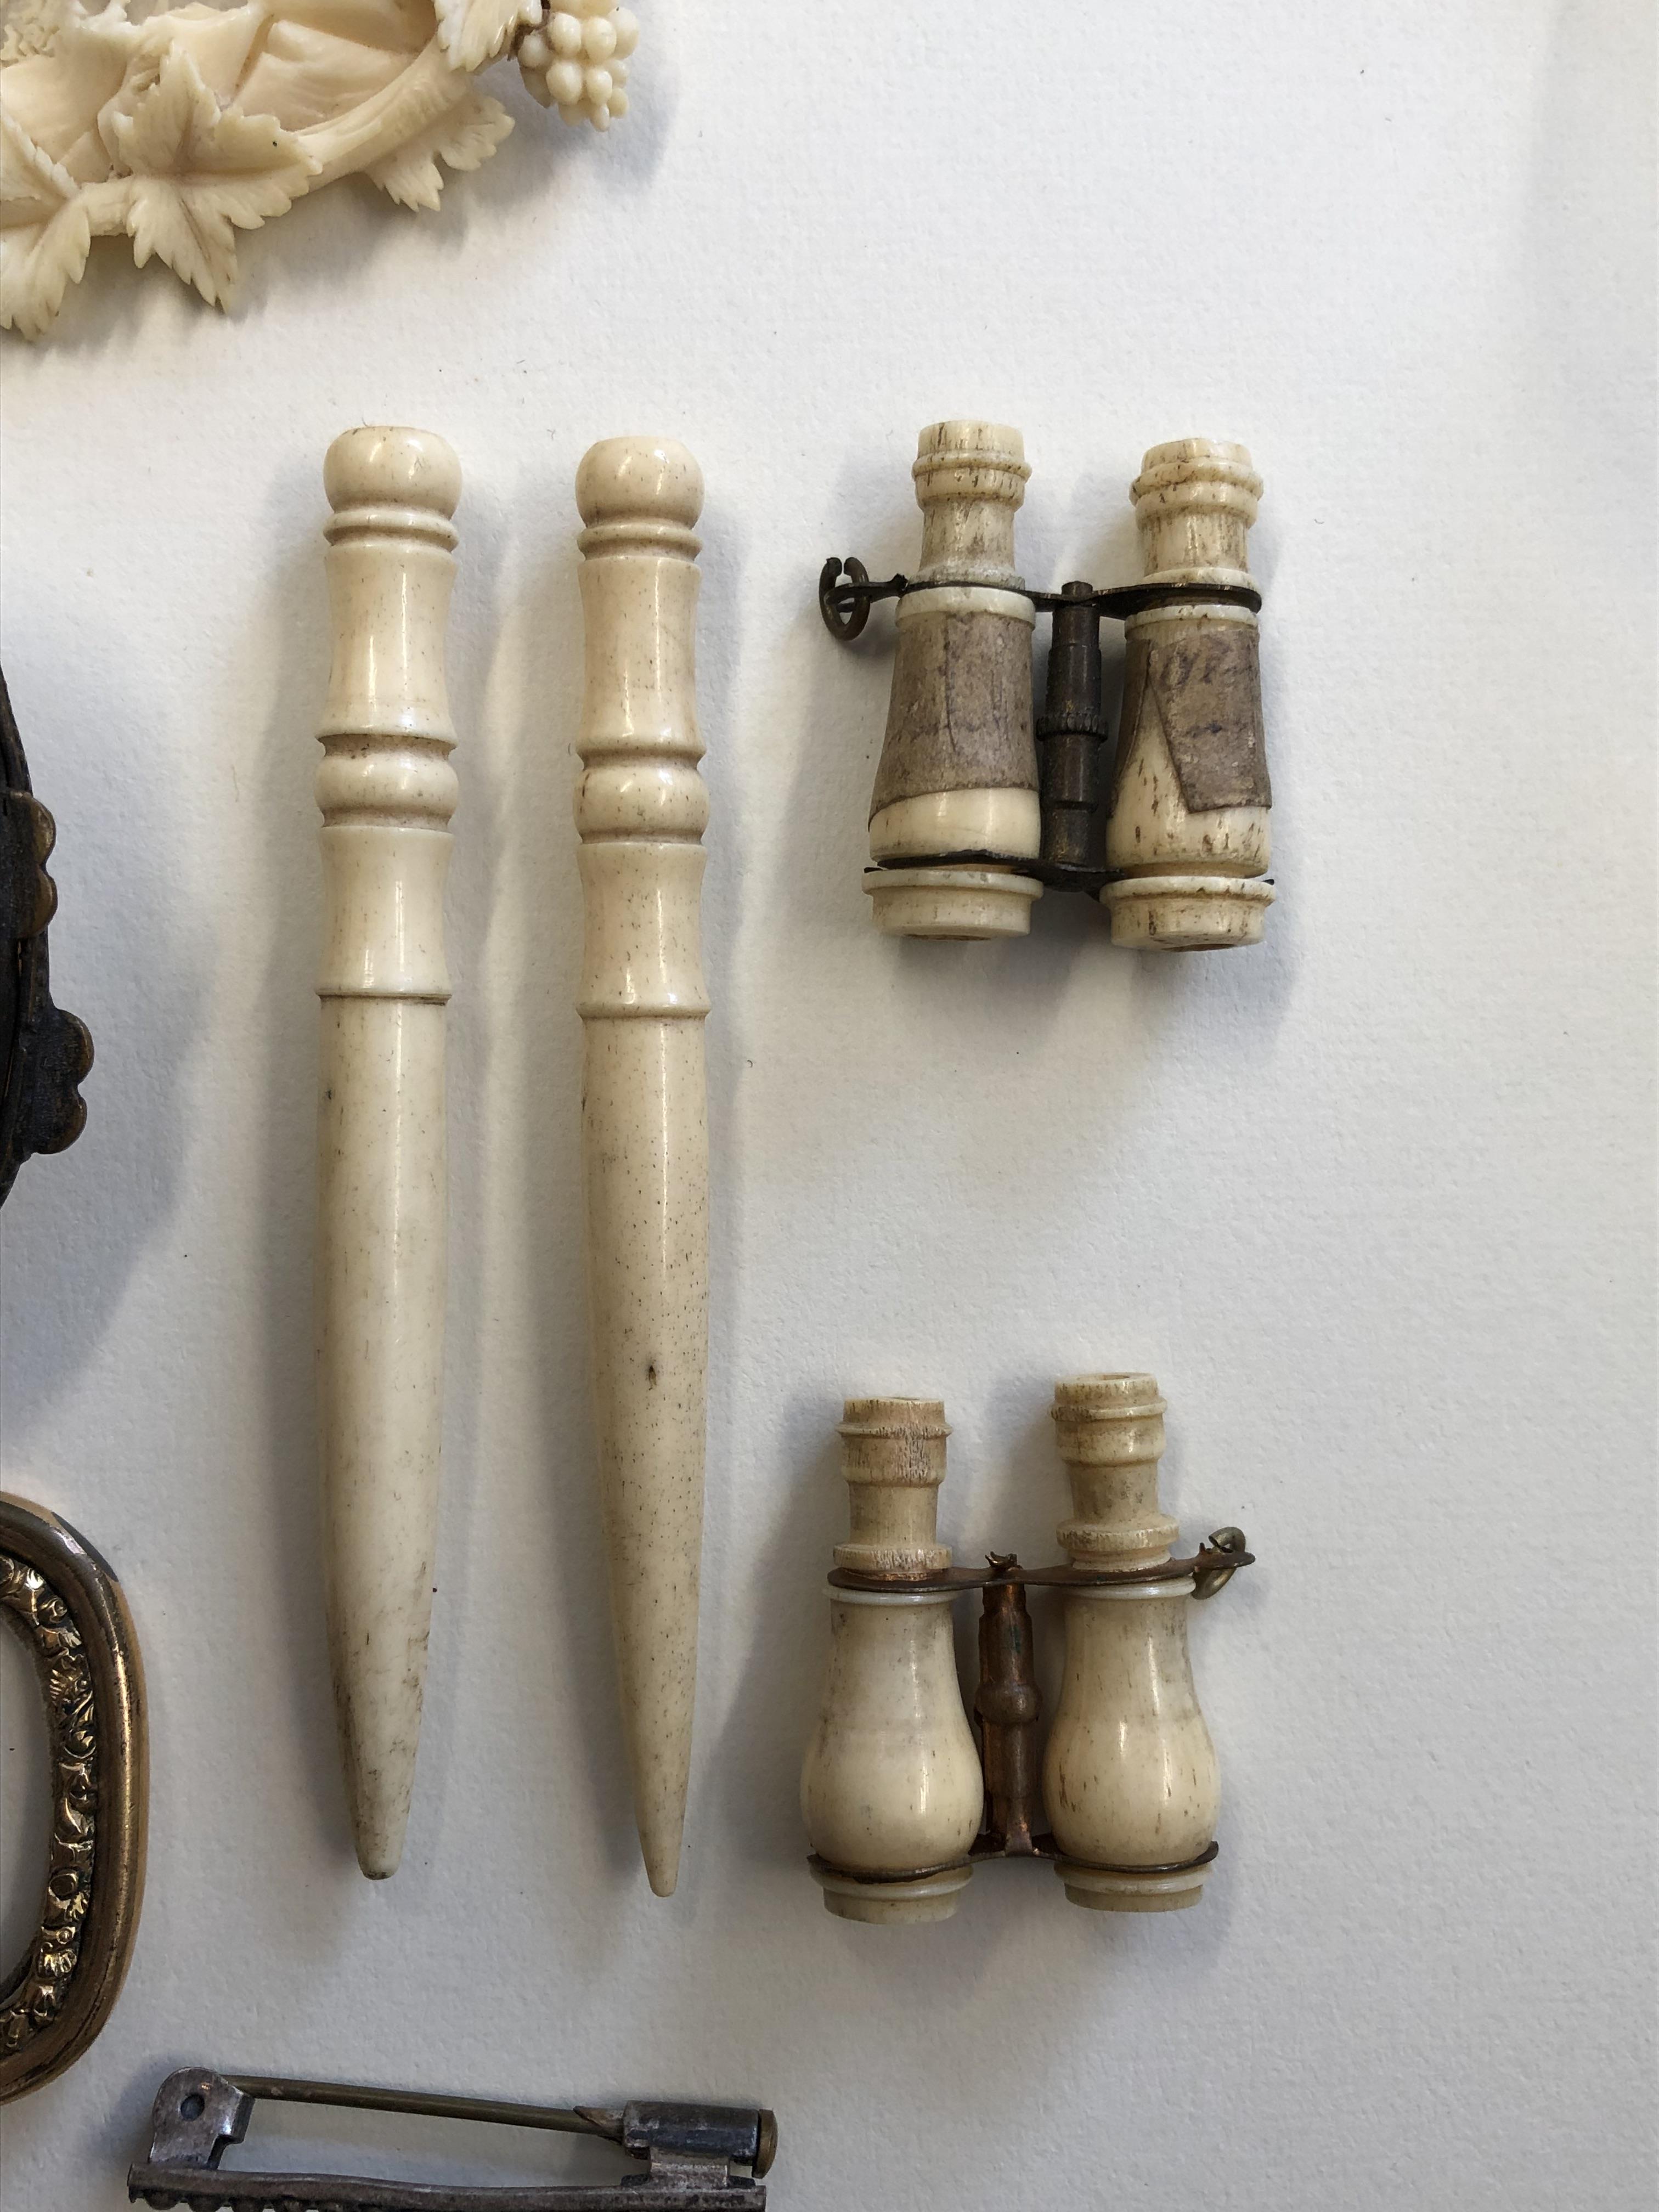 19TH CENTURY IVORY LETTER OPENER WITH STAG IN CAMEO HANDLE, MINIATURE BONE BINOCULARS, - Image 4 of 7